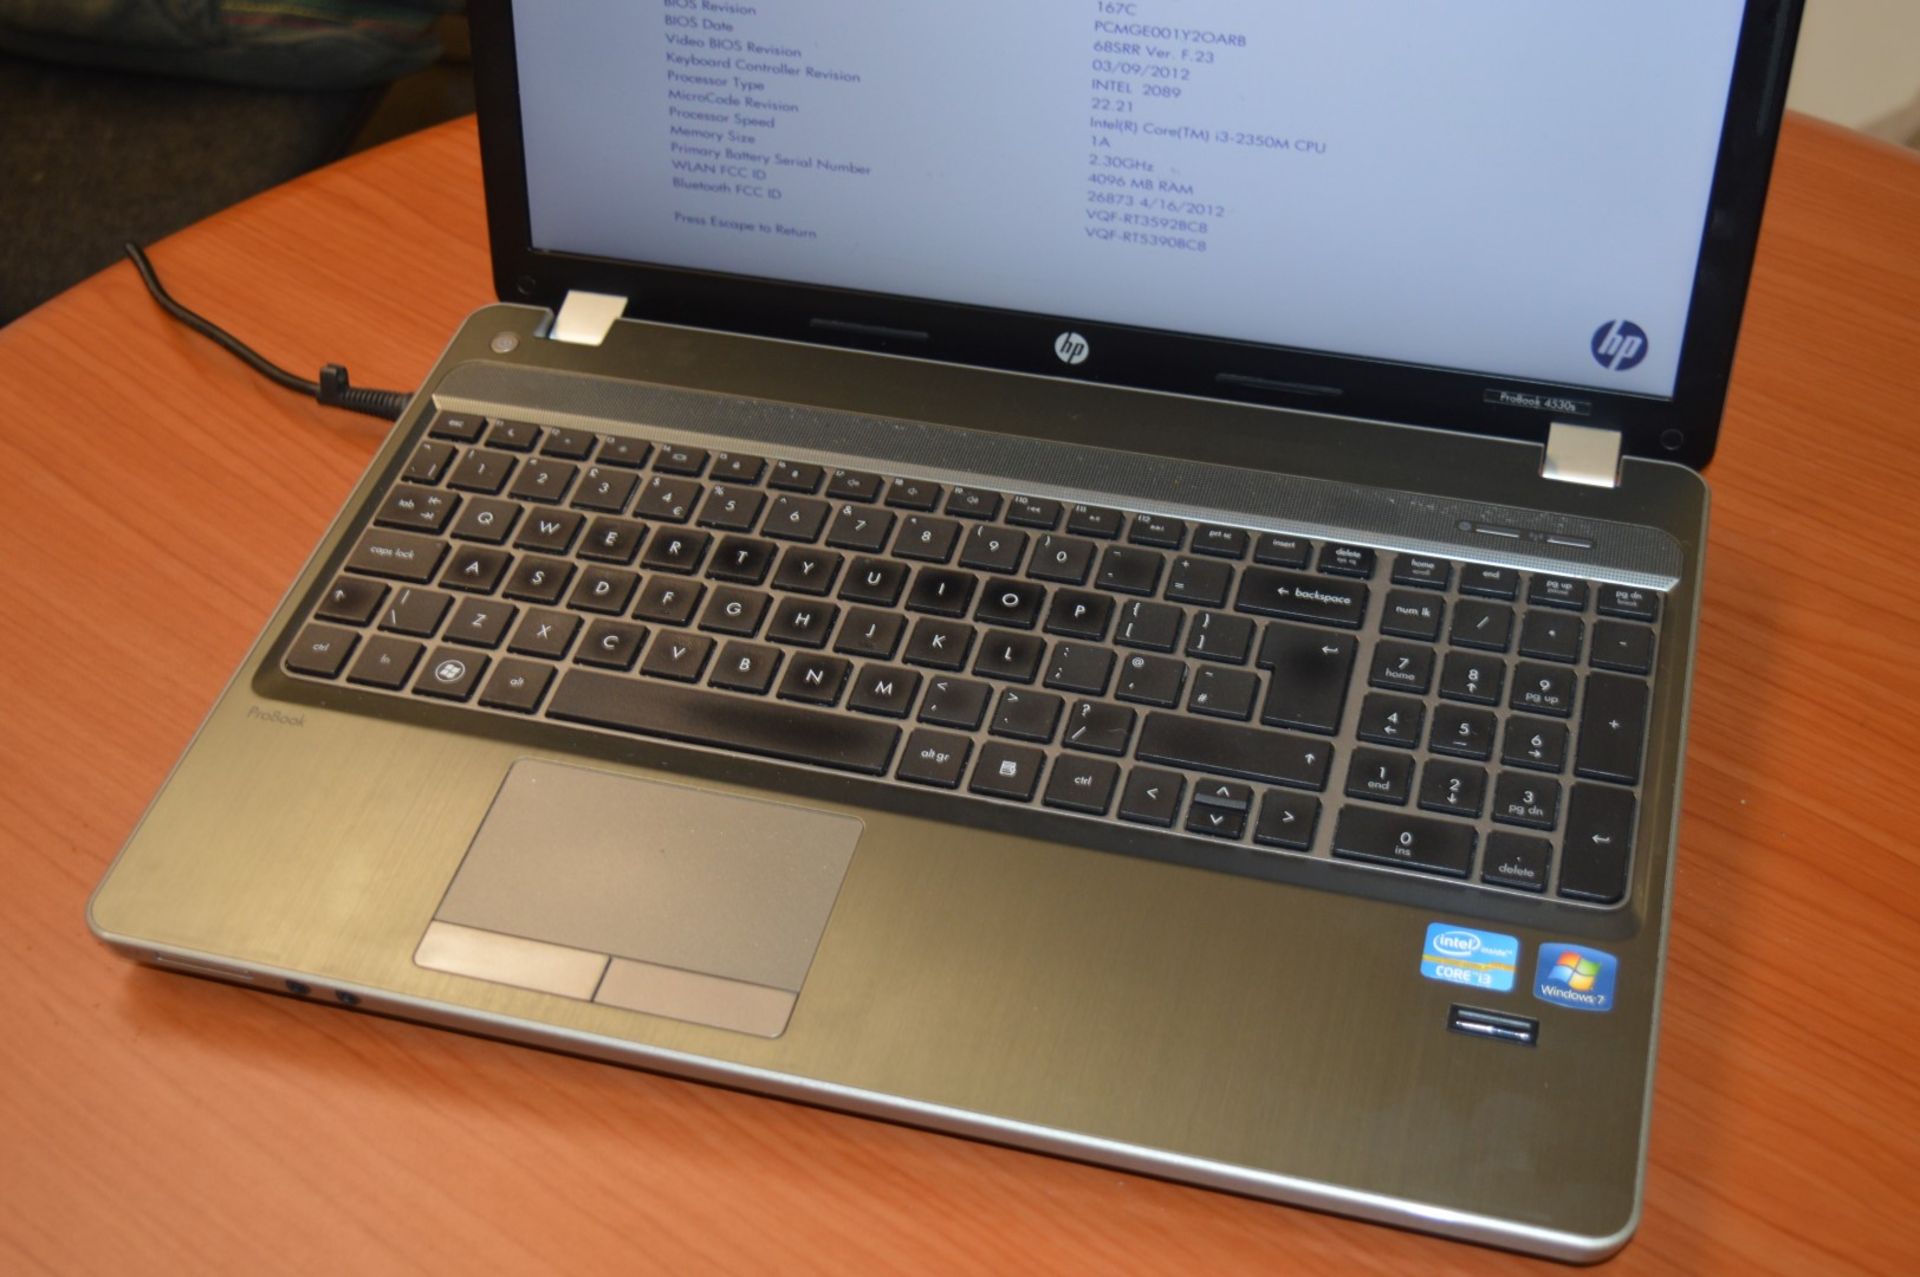 1 x HP Probook 4530s Laptop Computer - 15.6 Inch Screen Size - Features Intel Core i3-2350M Dual - Image 4 of 9